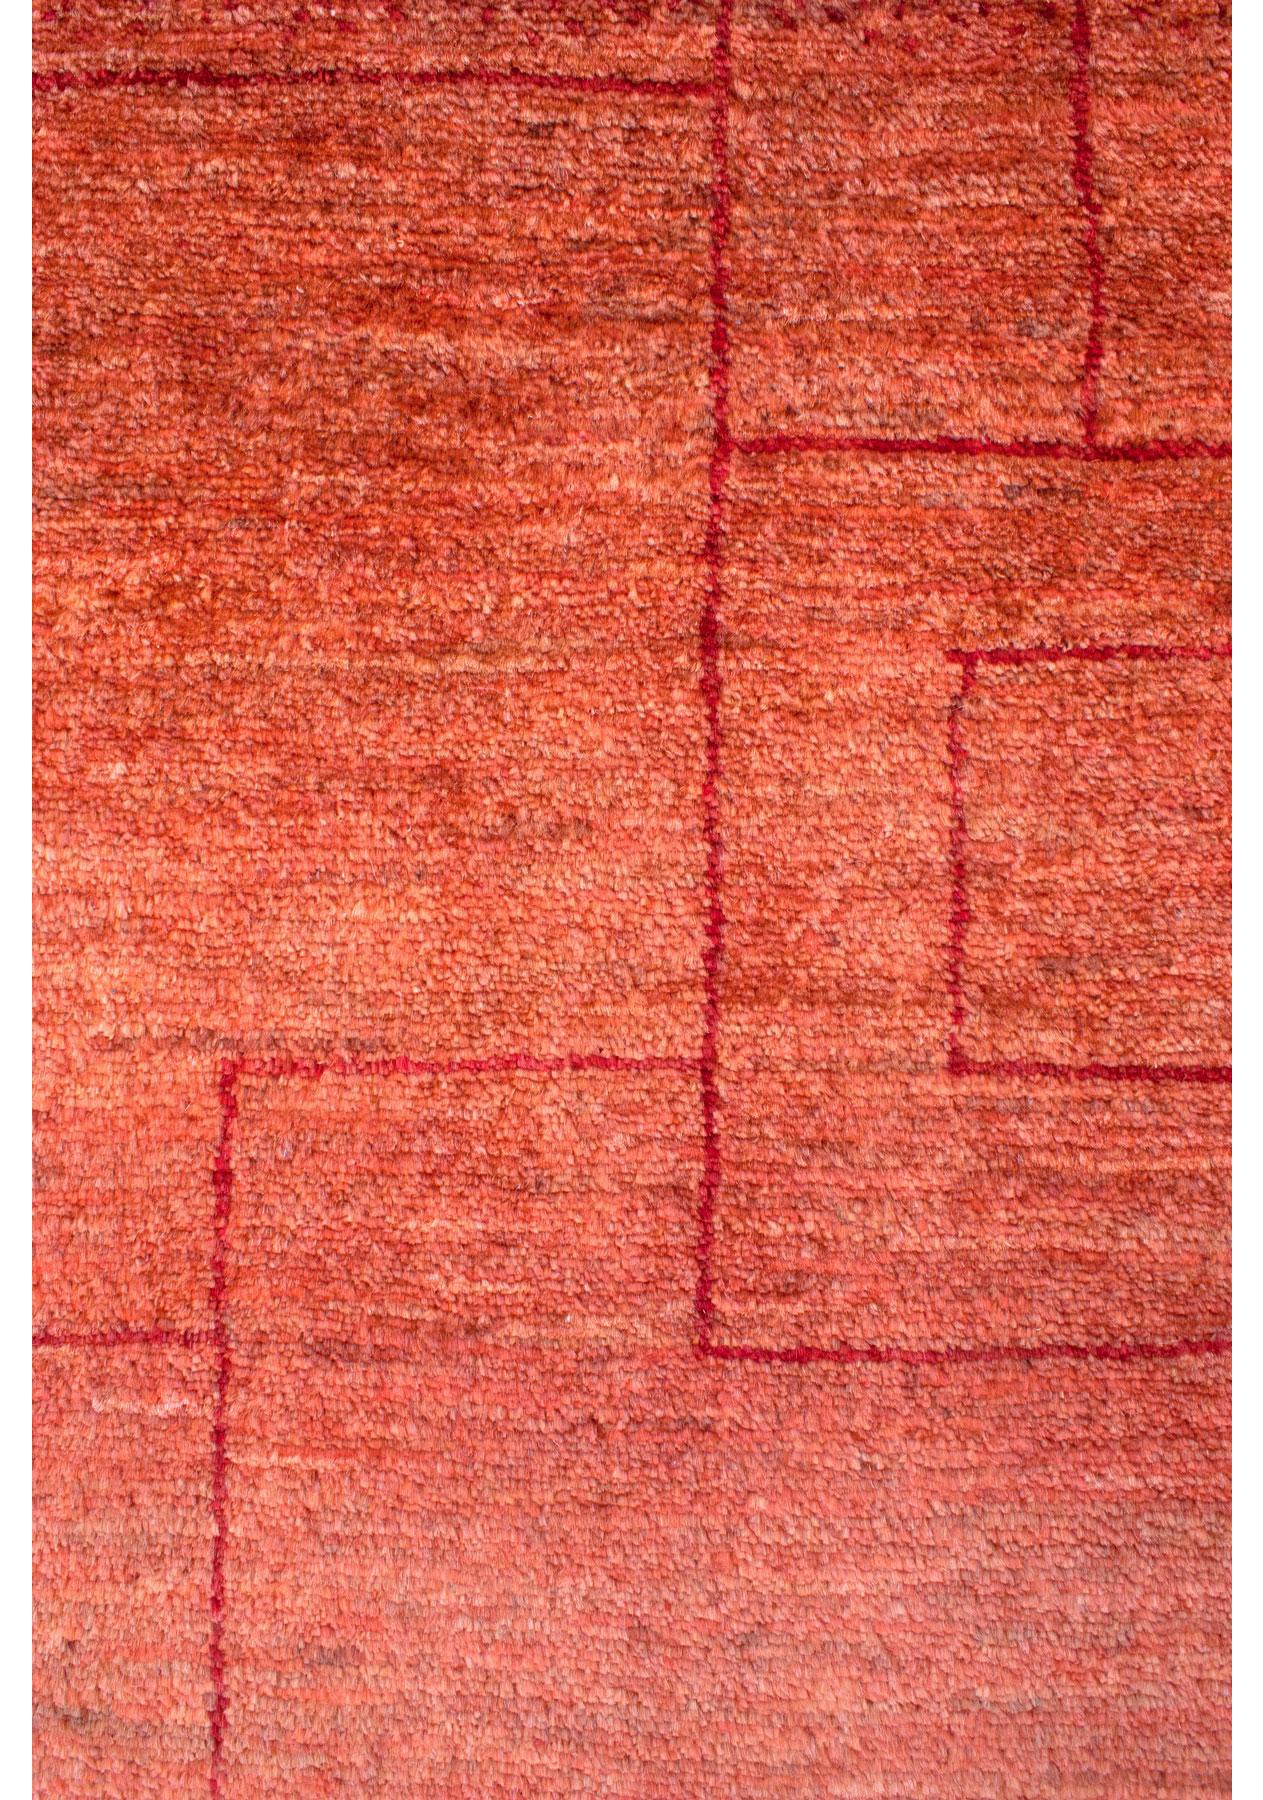 Large Blush and Red Striped Contemporary Gabbeh Persian Wool Rug. Examine this extraordinary rug closely. The bands of blush and red initially appear as great washes, but with a closer look, you'll see whimsical geometric details within the fields.